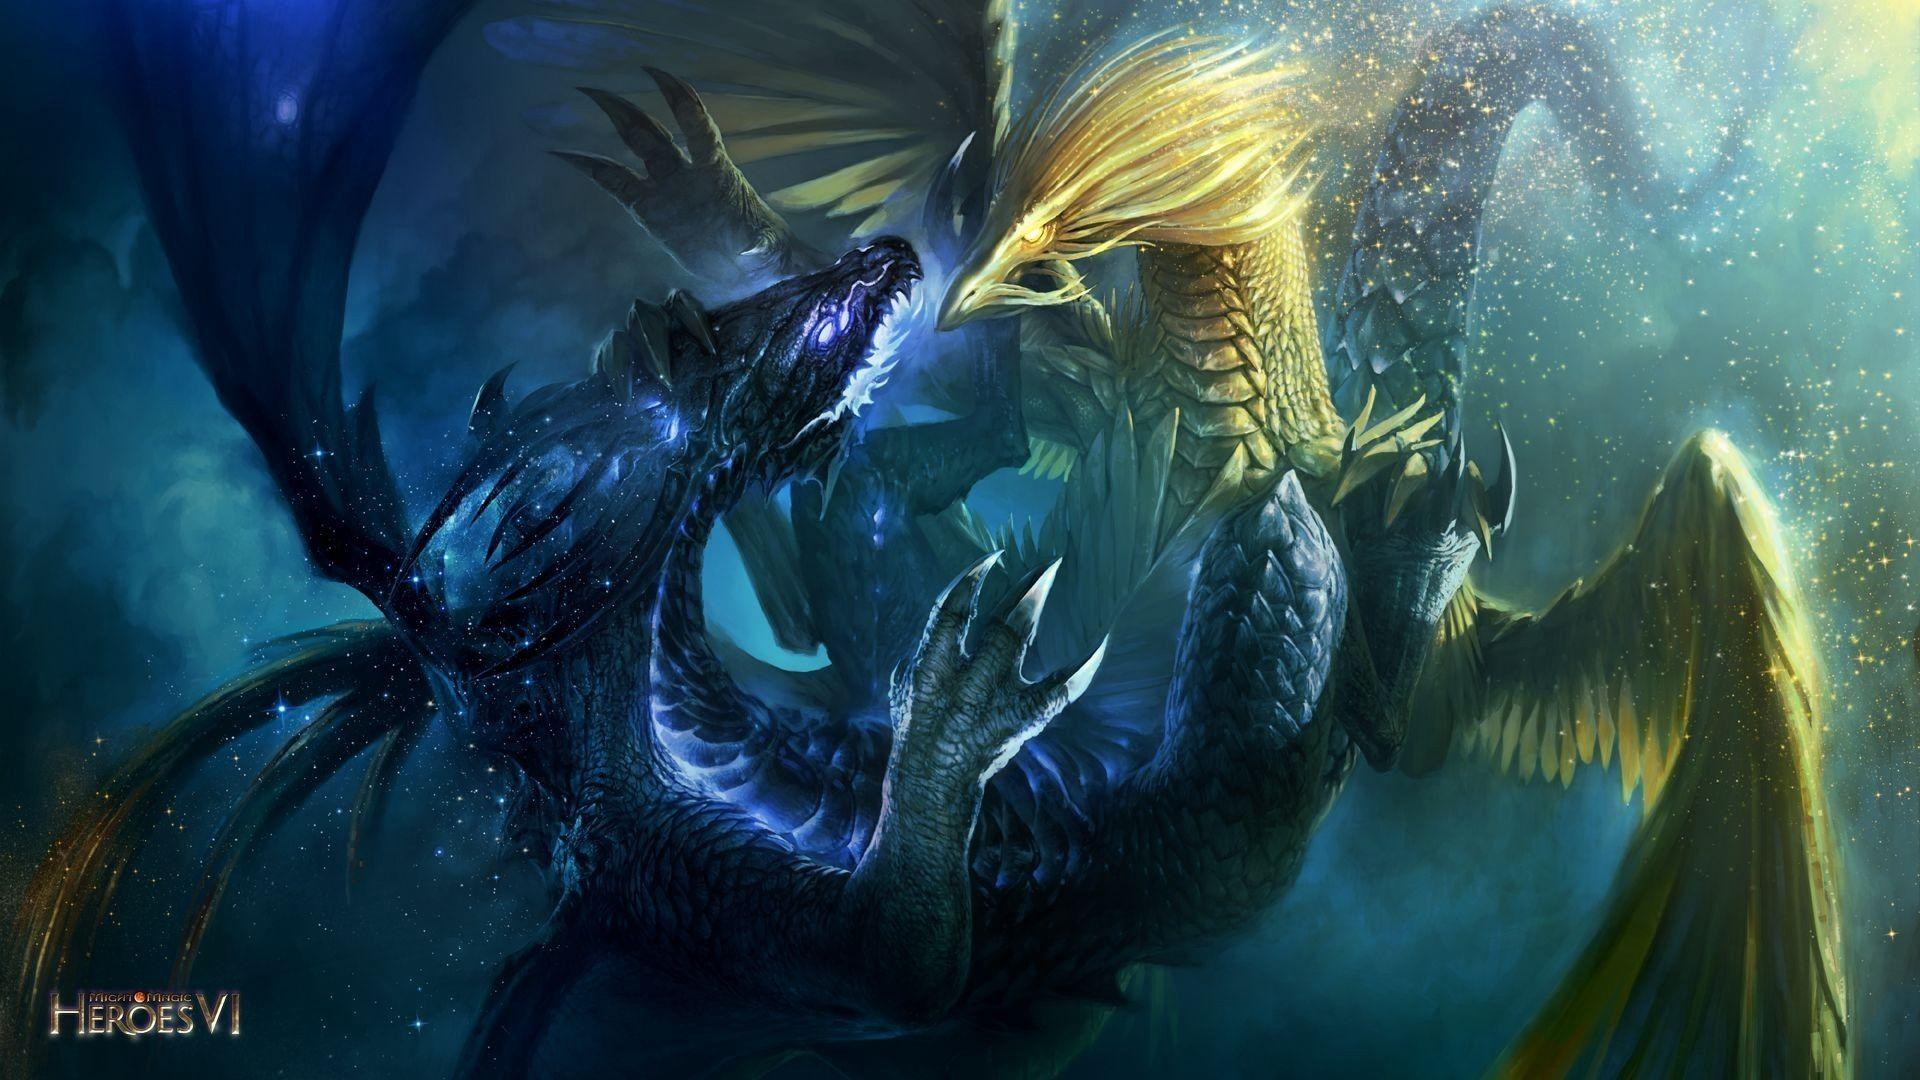 Download wallpaper 1920x1080 might and magic heroes dragons